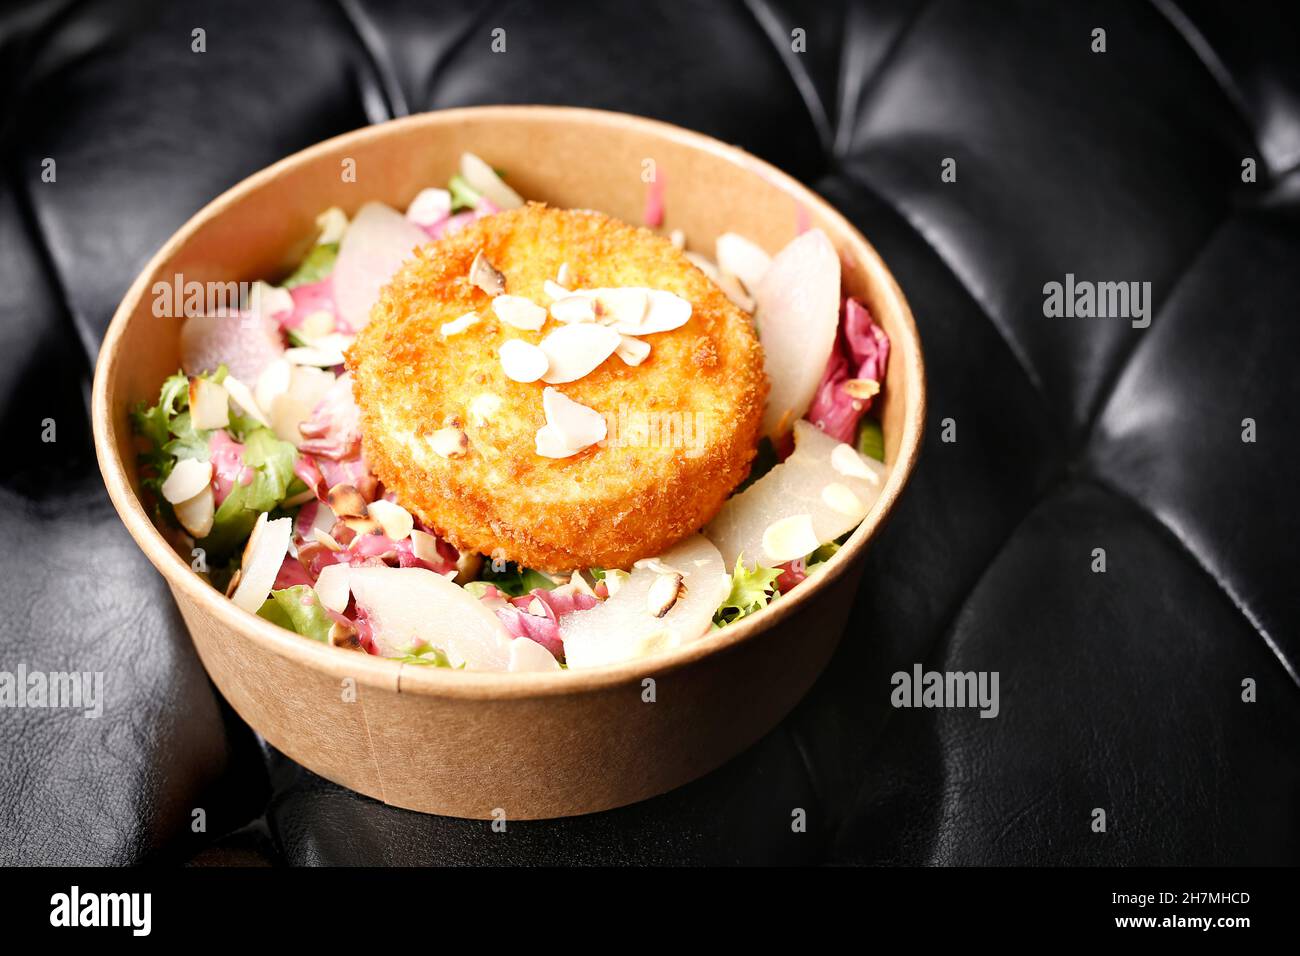 Fried camembert cheese on a green salad. Takeaway, diet box. Appetizing ready-to-go dish served in a disposable box. Culinary photography. Food backgr Stock Photo